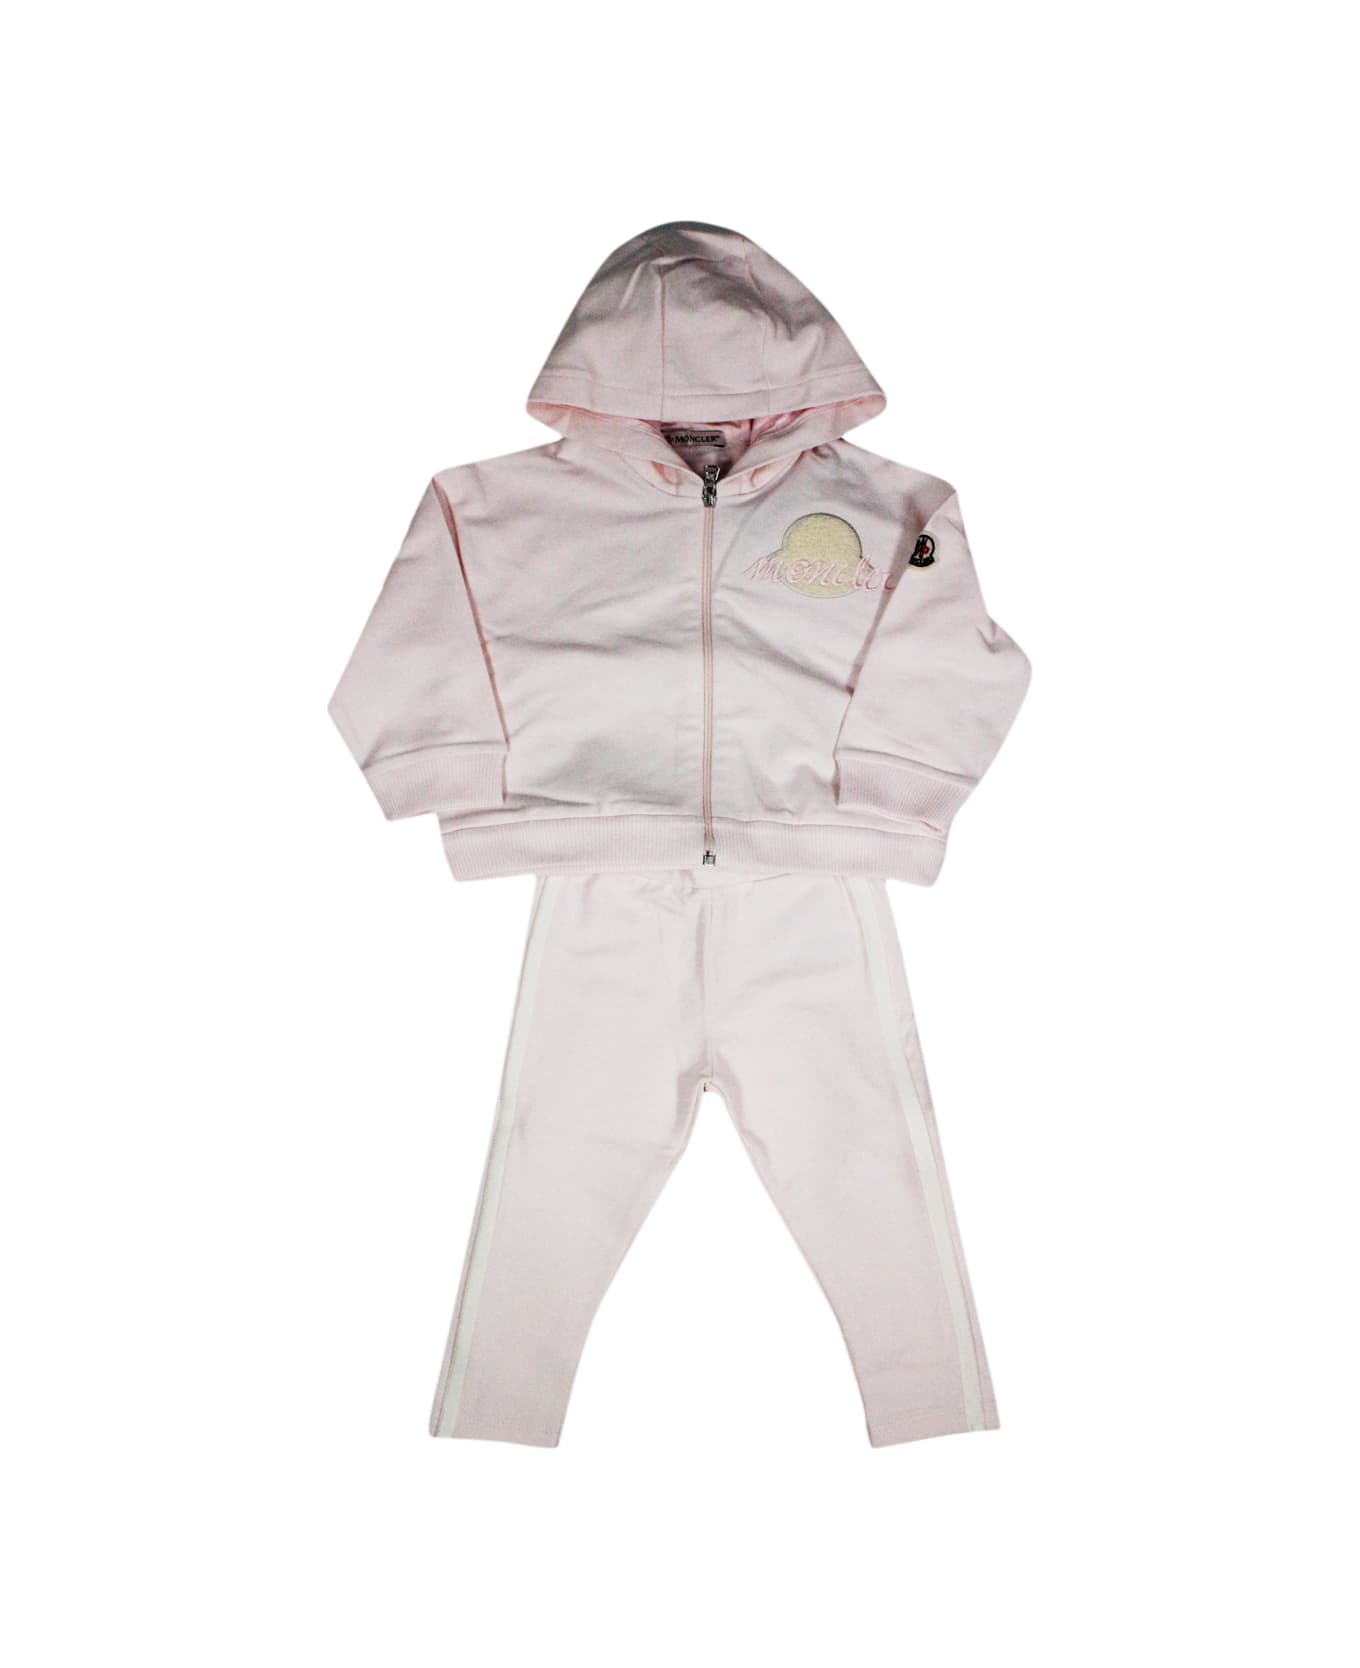 Moncler Complete With Zip-up Sweatshirt With Long-sleeved Hood In Fine Cotton And Trousers With Elastic Waist. Logo On The Chest - Pink